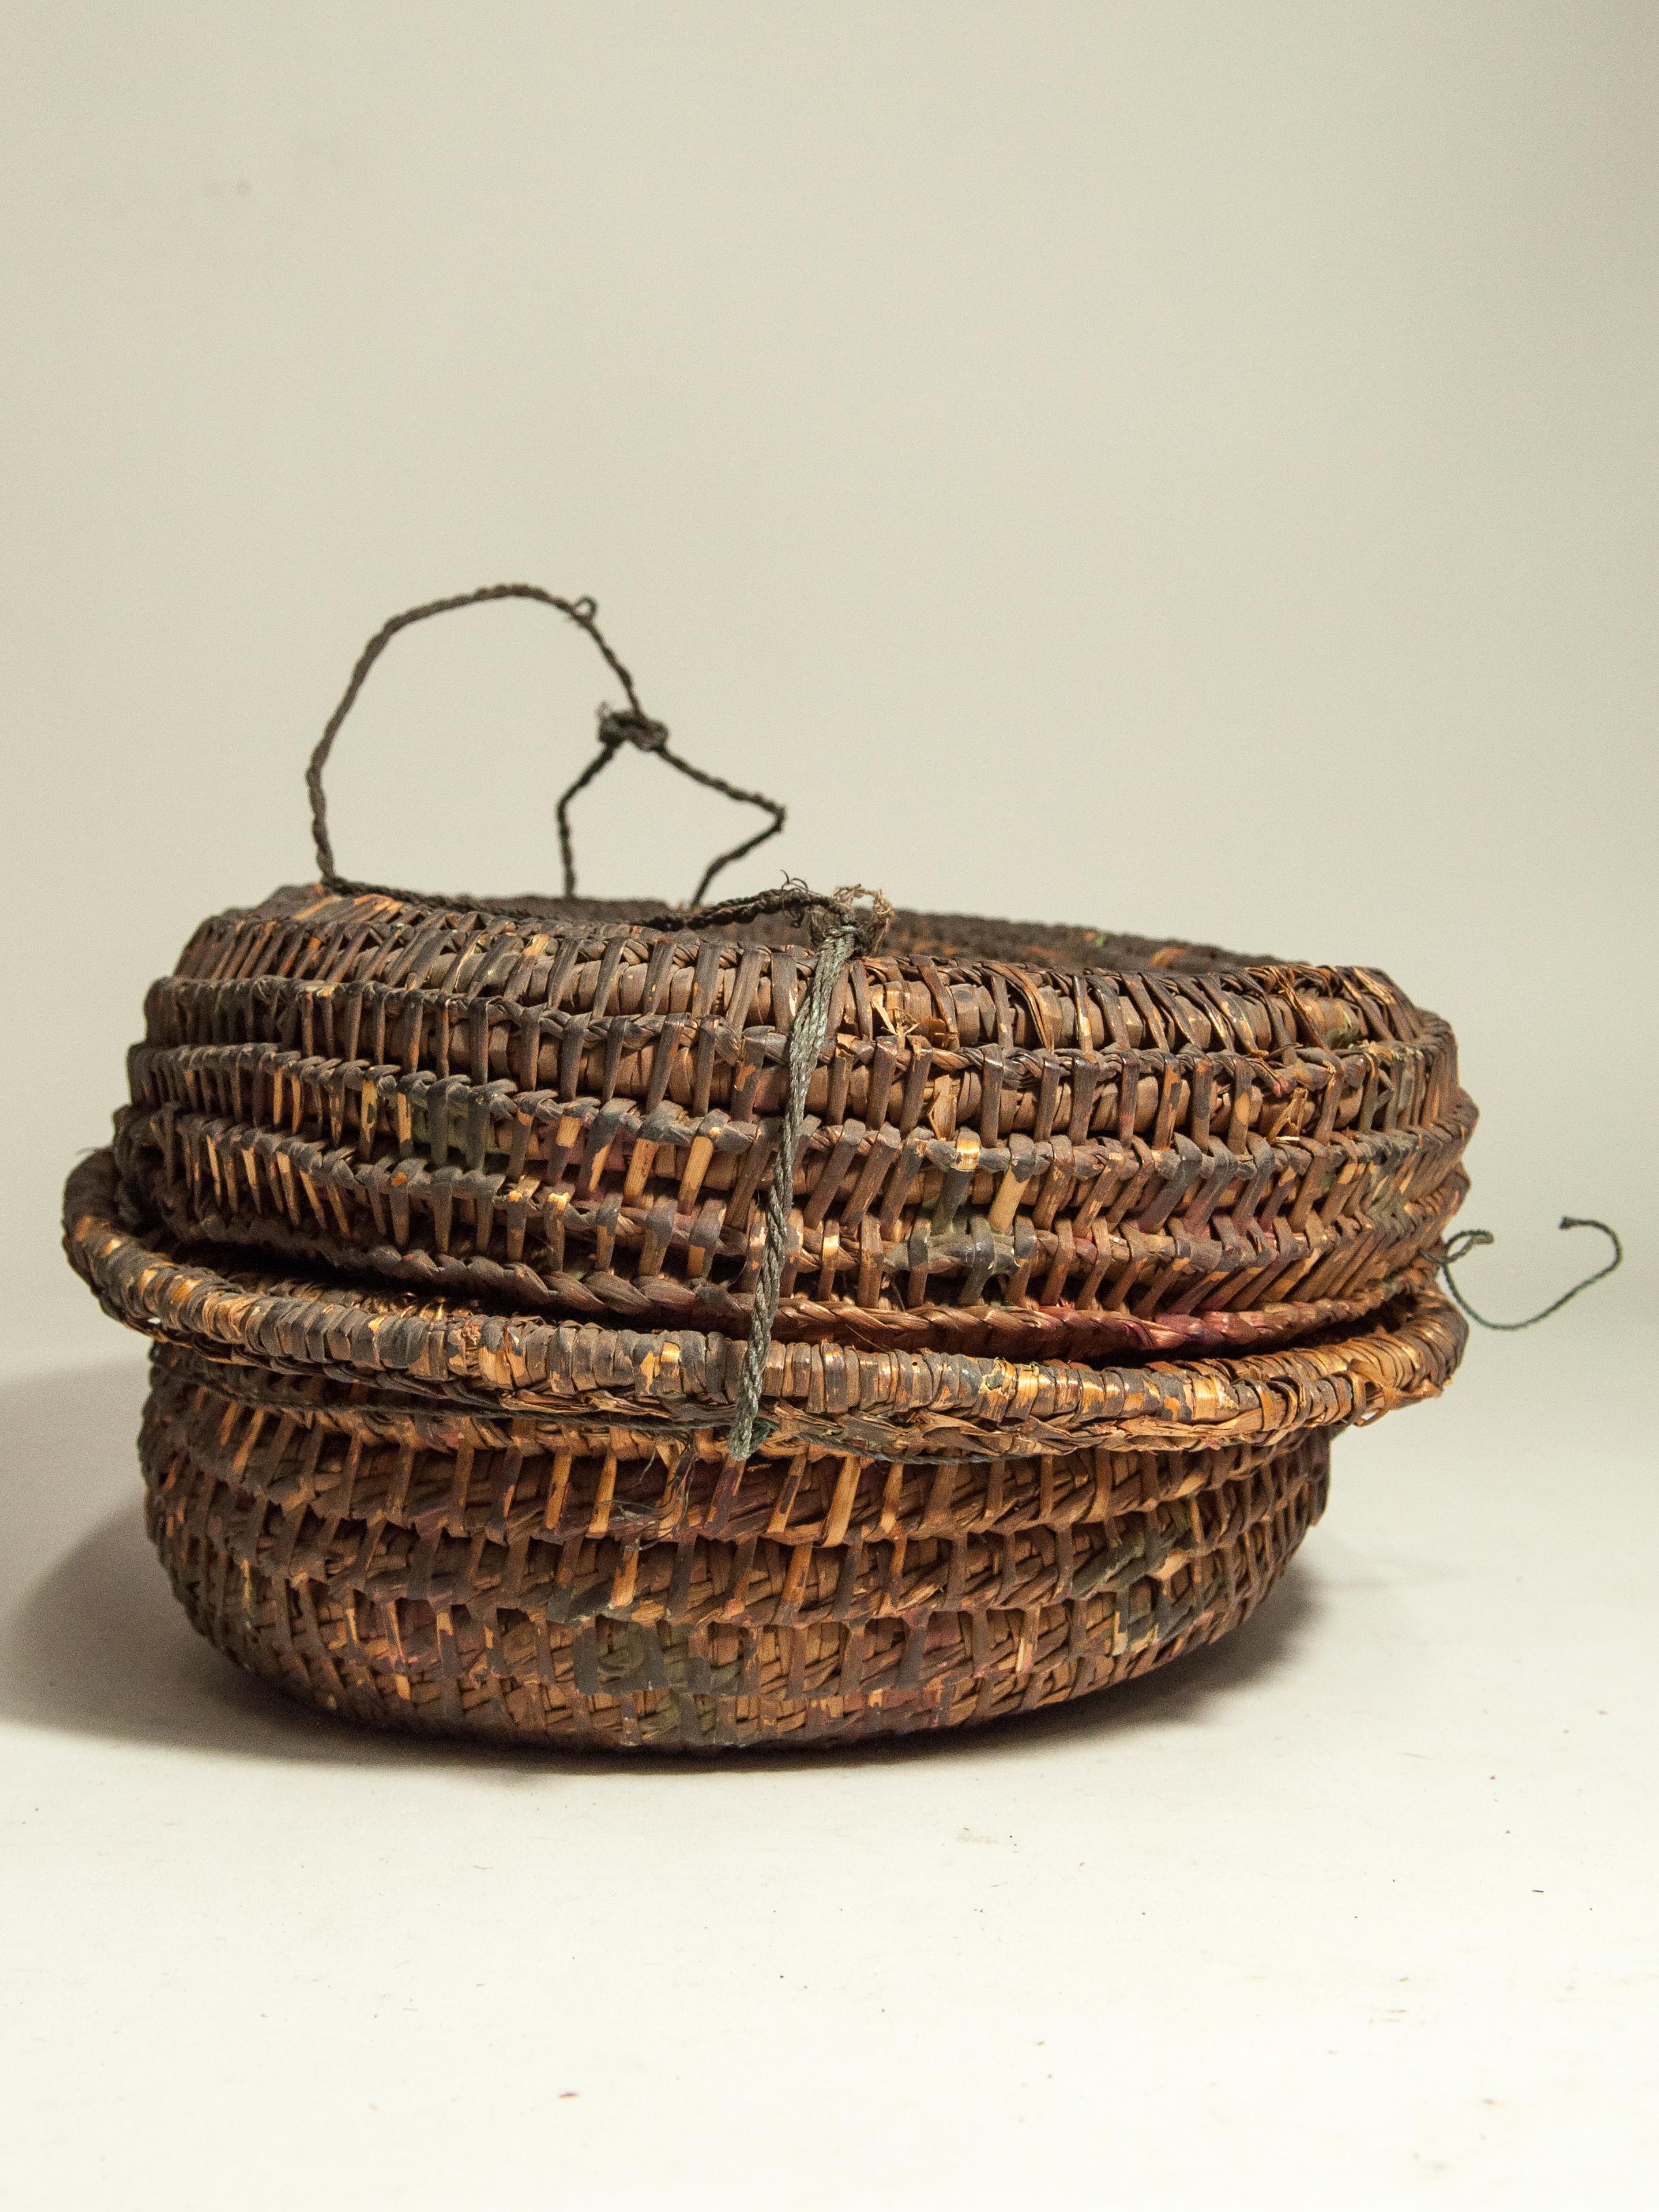 Hand-Crafted Vintage Rustic Basket Box from the Tharu of Nepal, Mid-20th Century